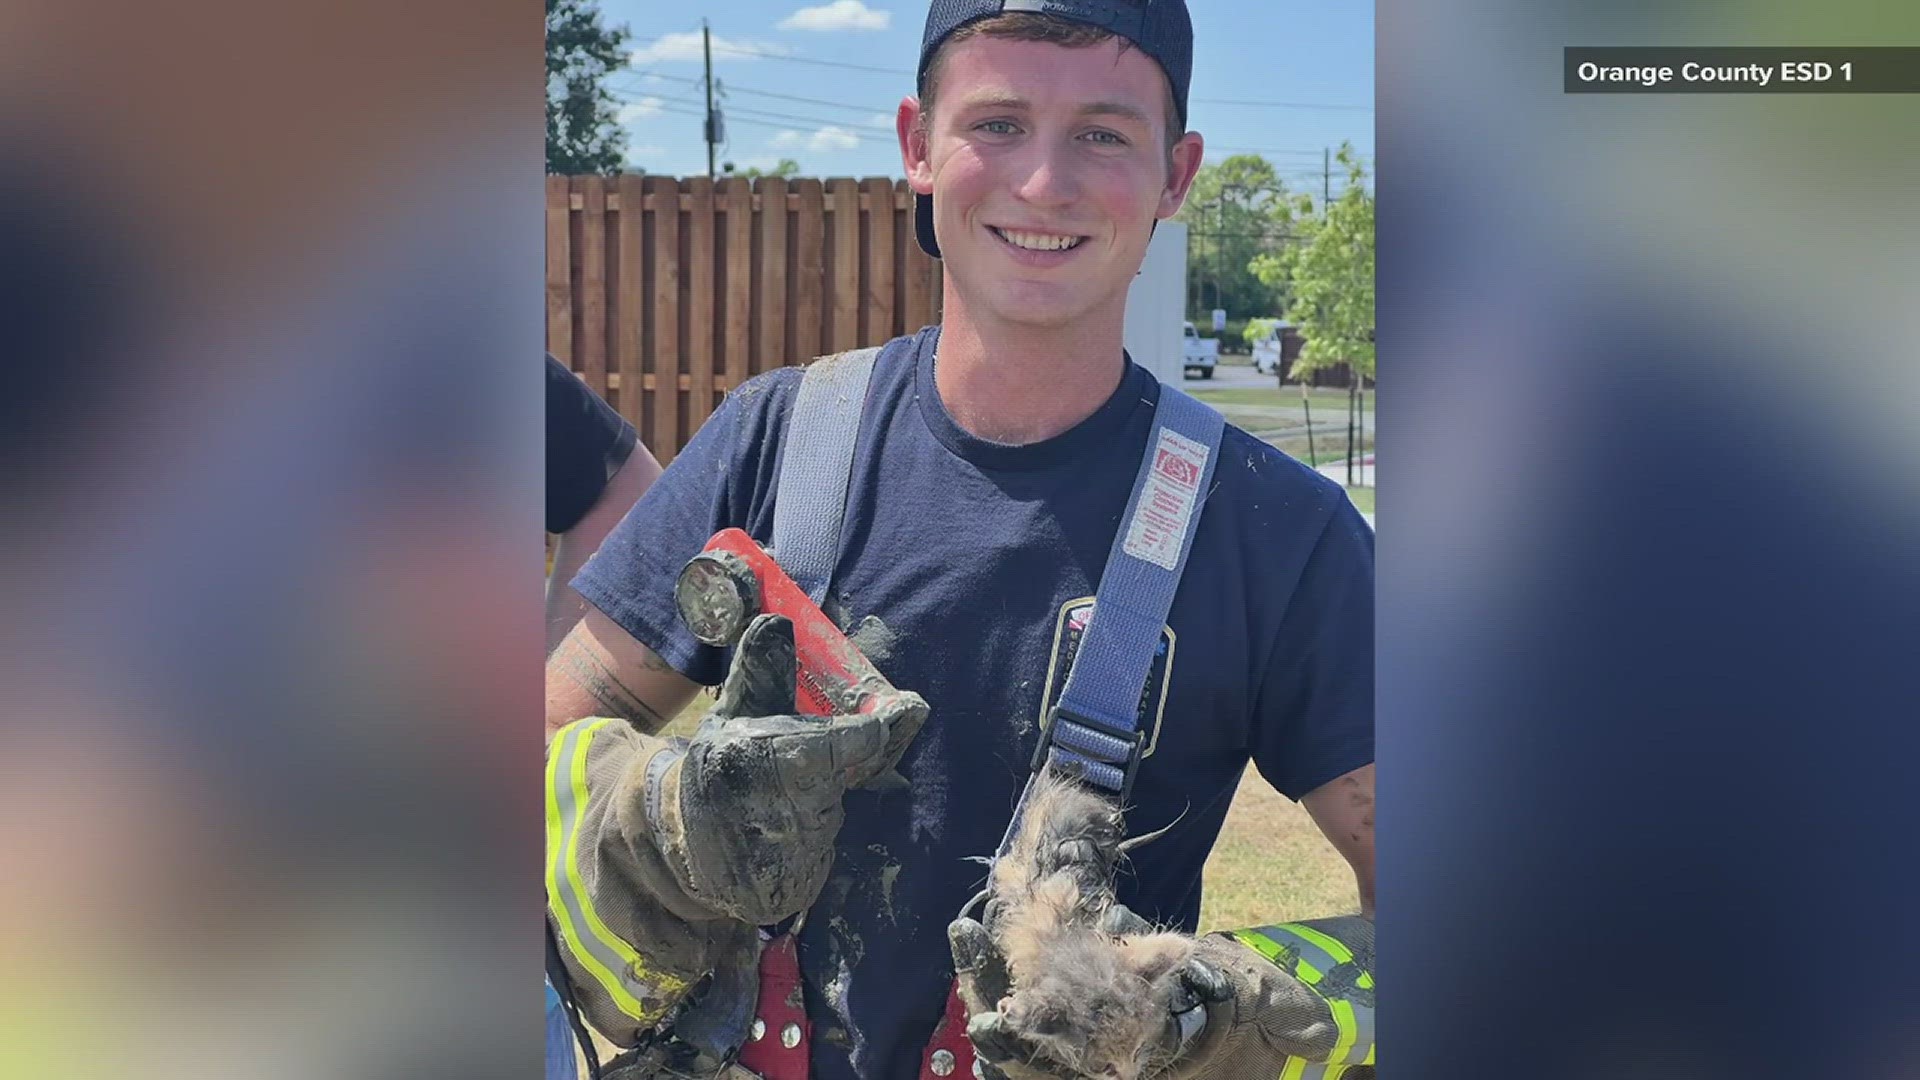 Hunter Weir tells 12News the kitten is now at Vidor Animal Control and a fellow firefighter has already asked to adopt the kitten once it is healthy again.